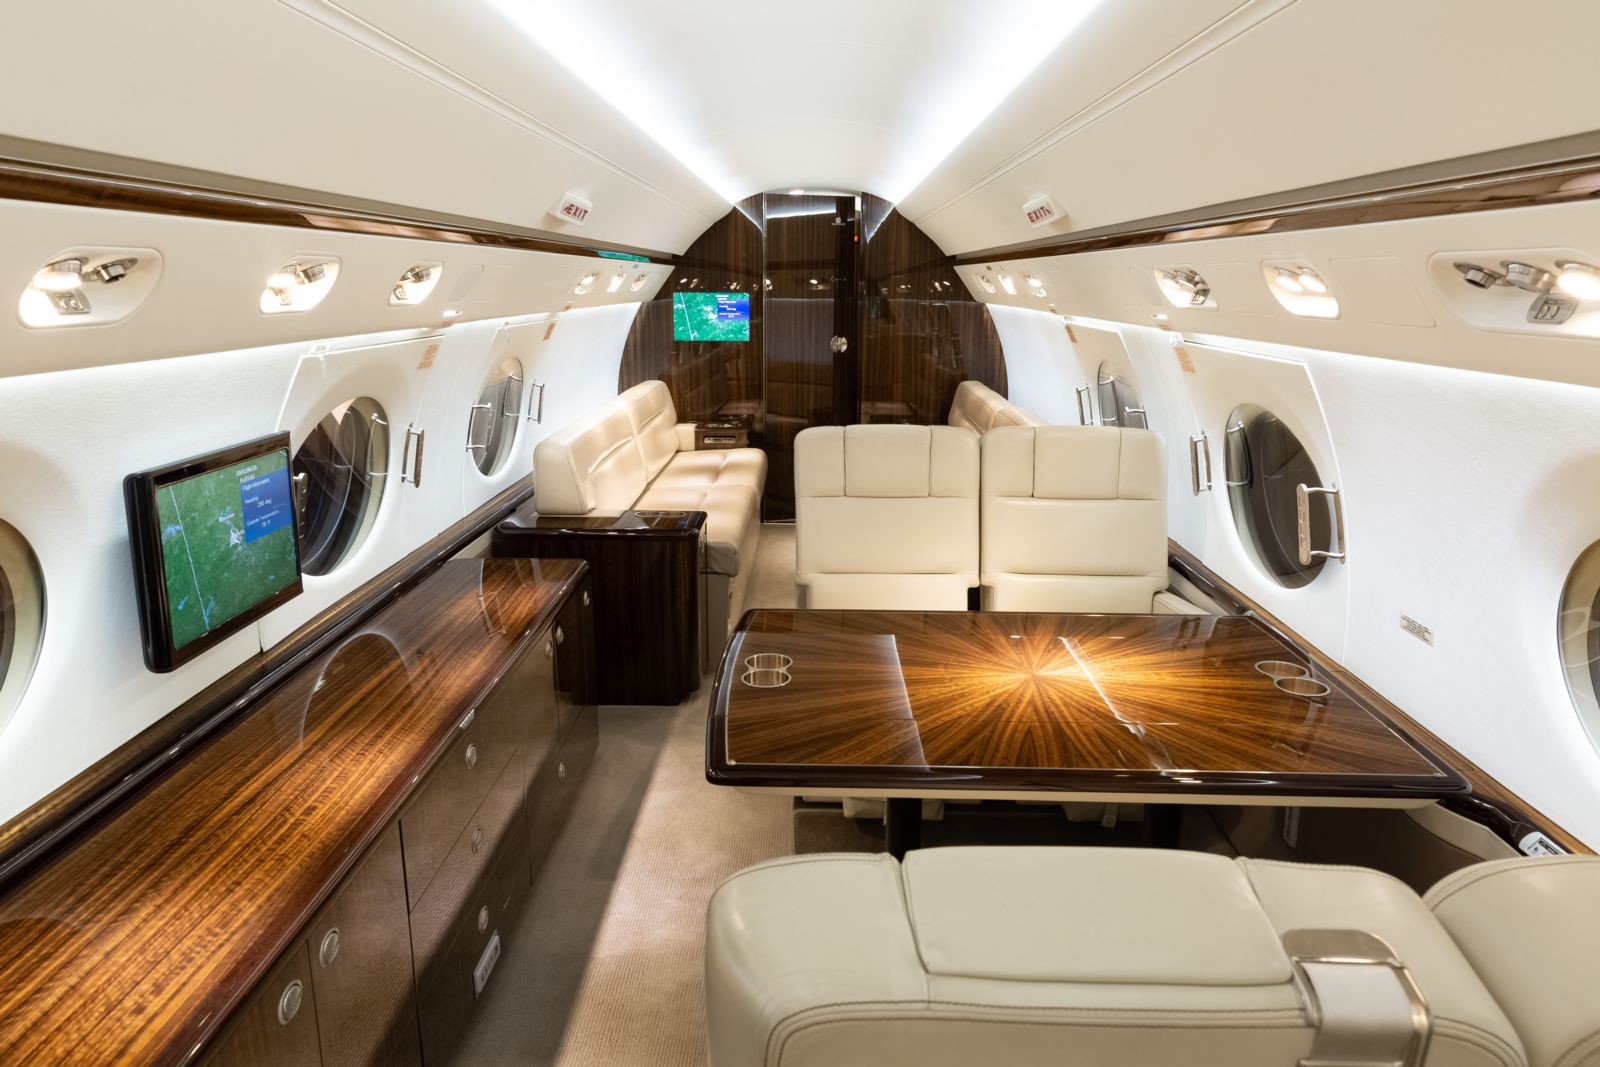 Gulfstream G550  S/N 5448 for sale | gallery image: /userfiles/images/G550_sn5448/mid%20aft.jpg